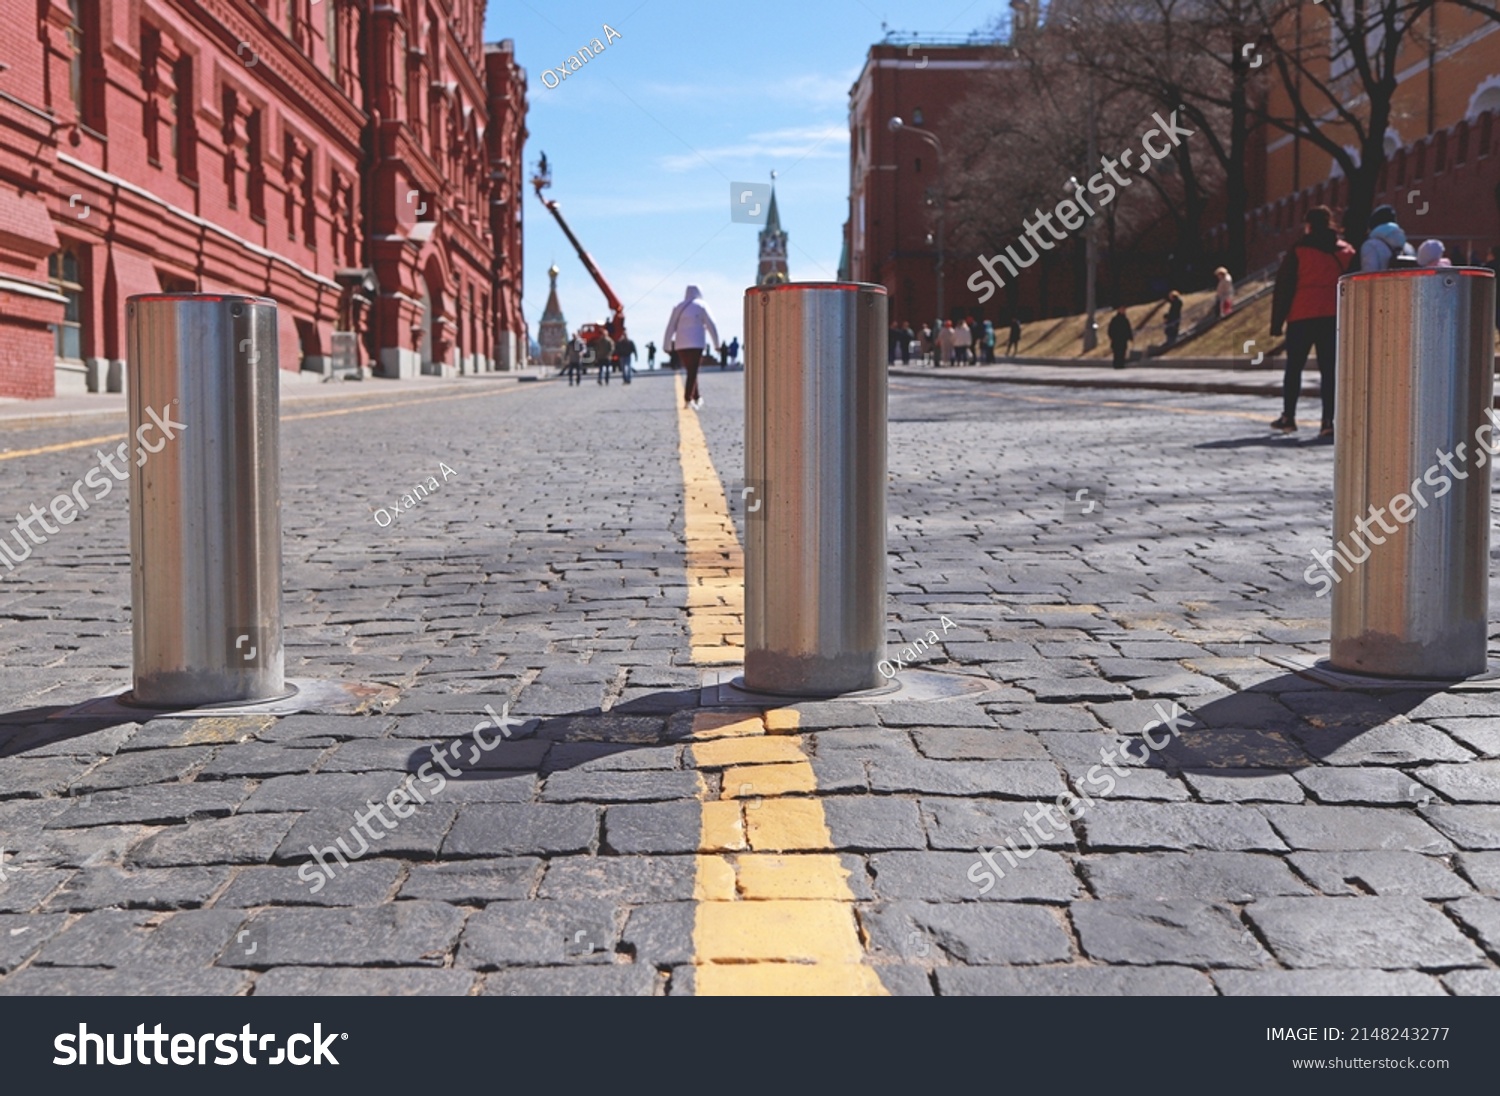 Moscow: Poles of Traffic blockers. Enter to Red Square via Kremlin passage (Kremlevsky proezd). Protection against the passage of vehicles. Steel automatic traffic blockers. #2148243277